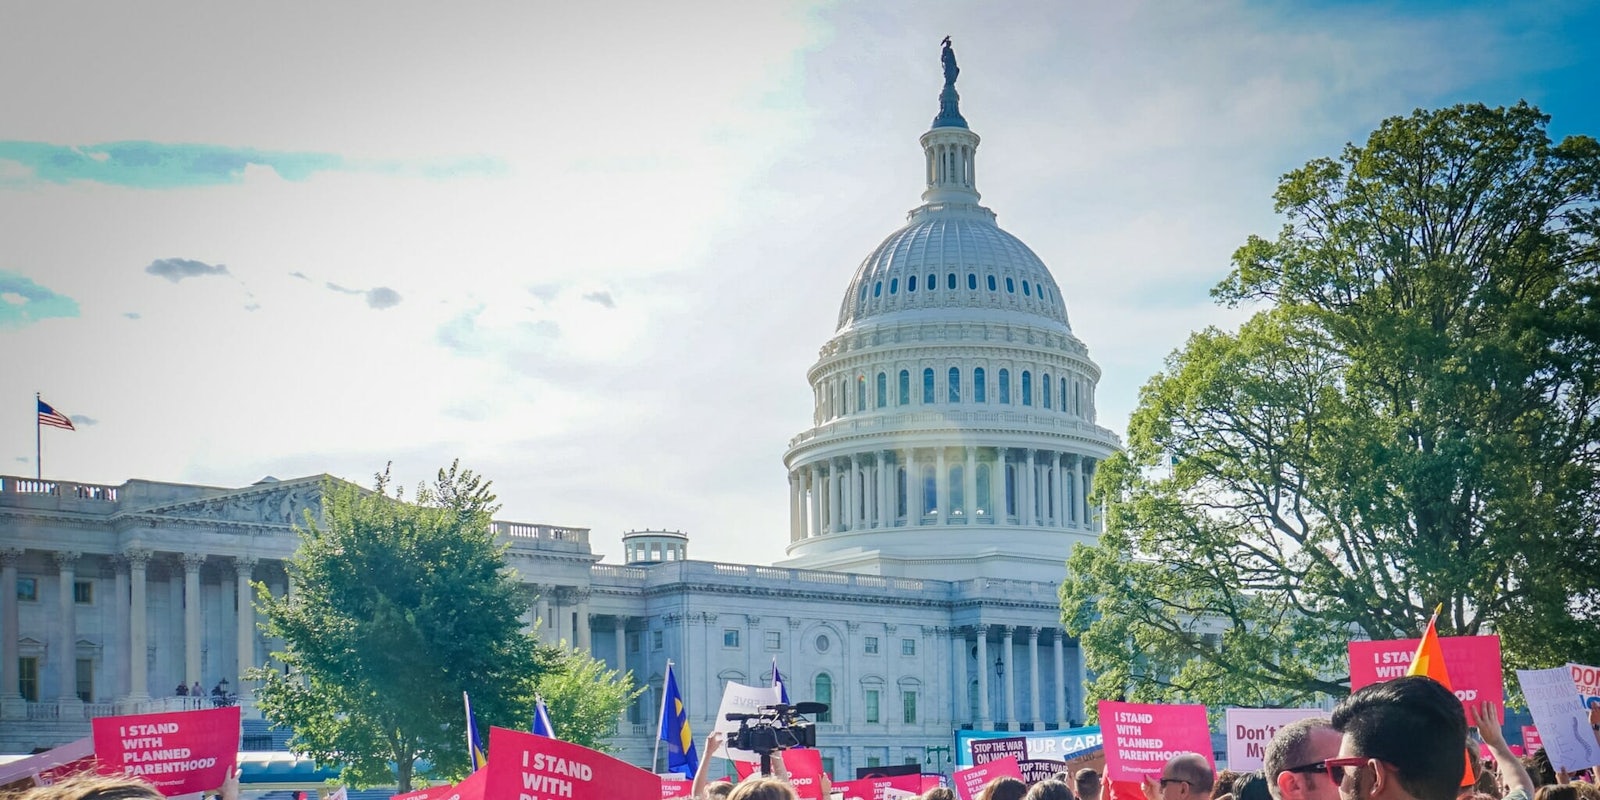 Citizens and leaders gather at the U.S. Capitol to support quality health care for all.